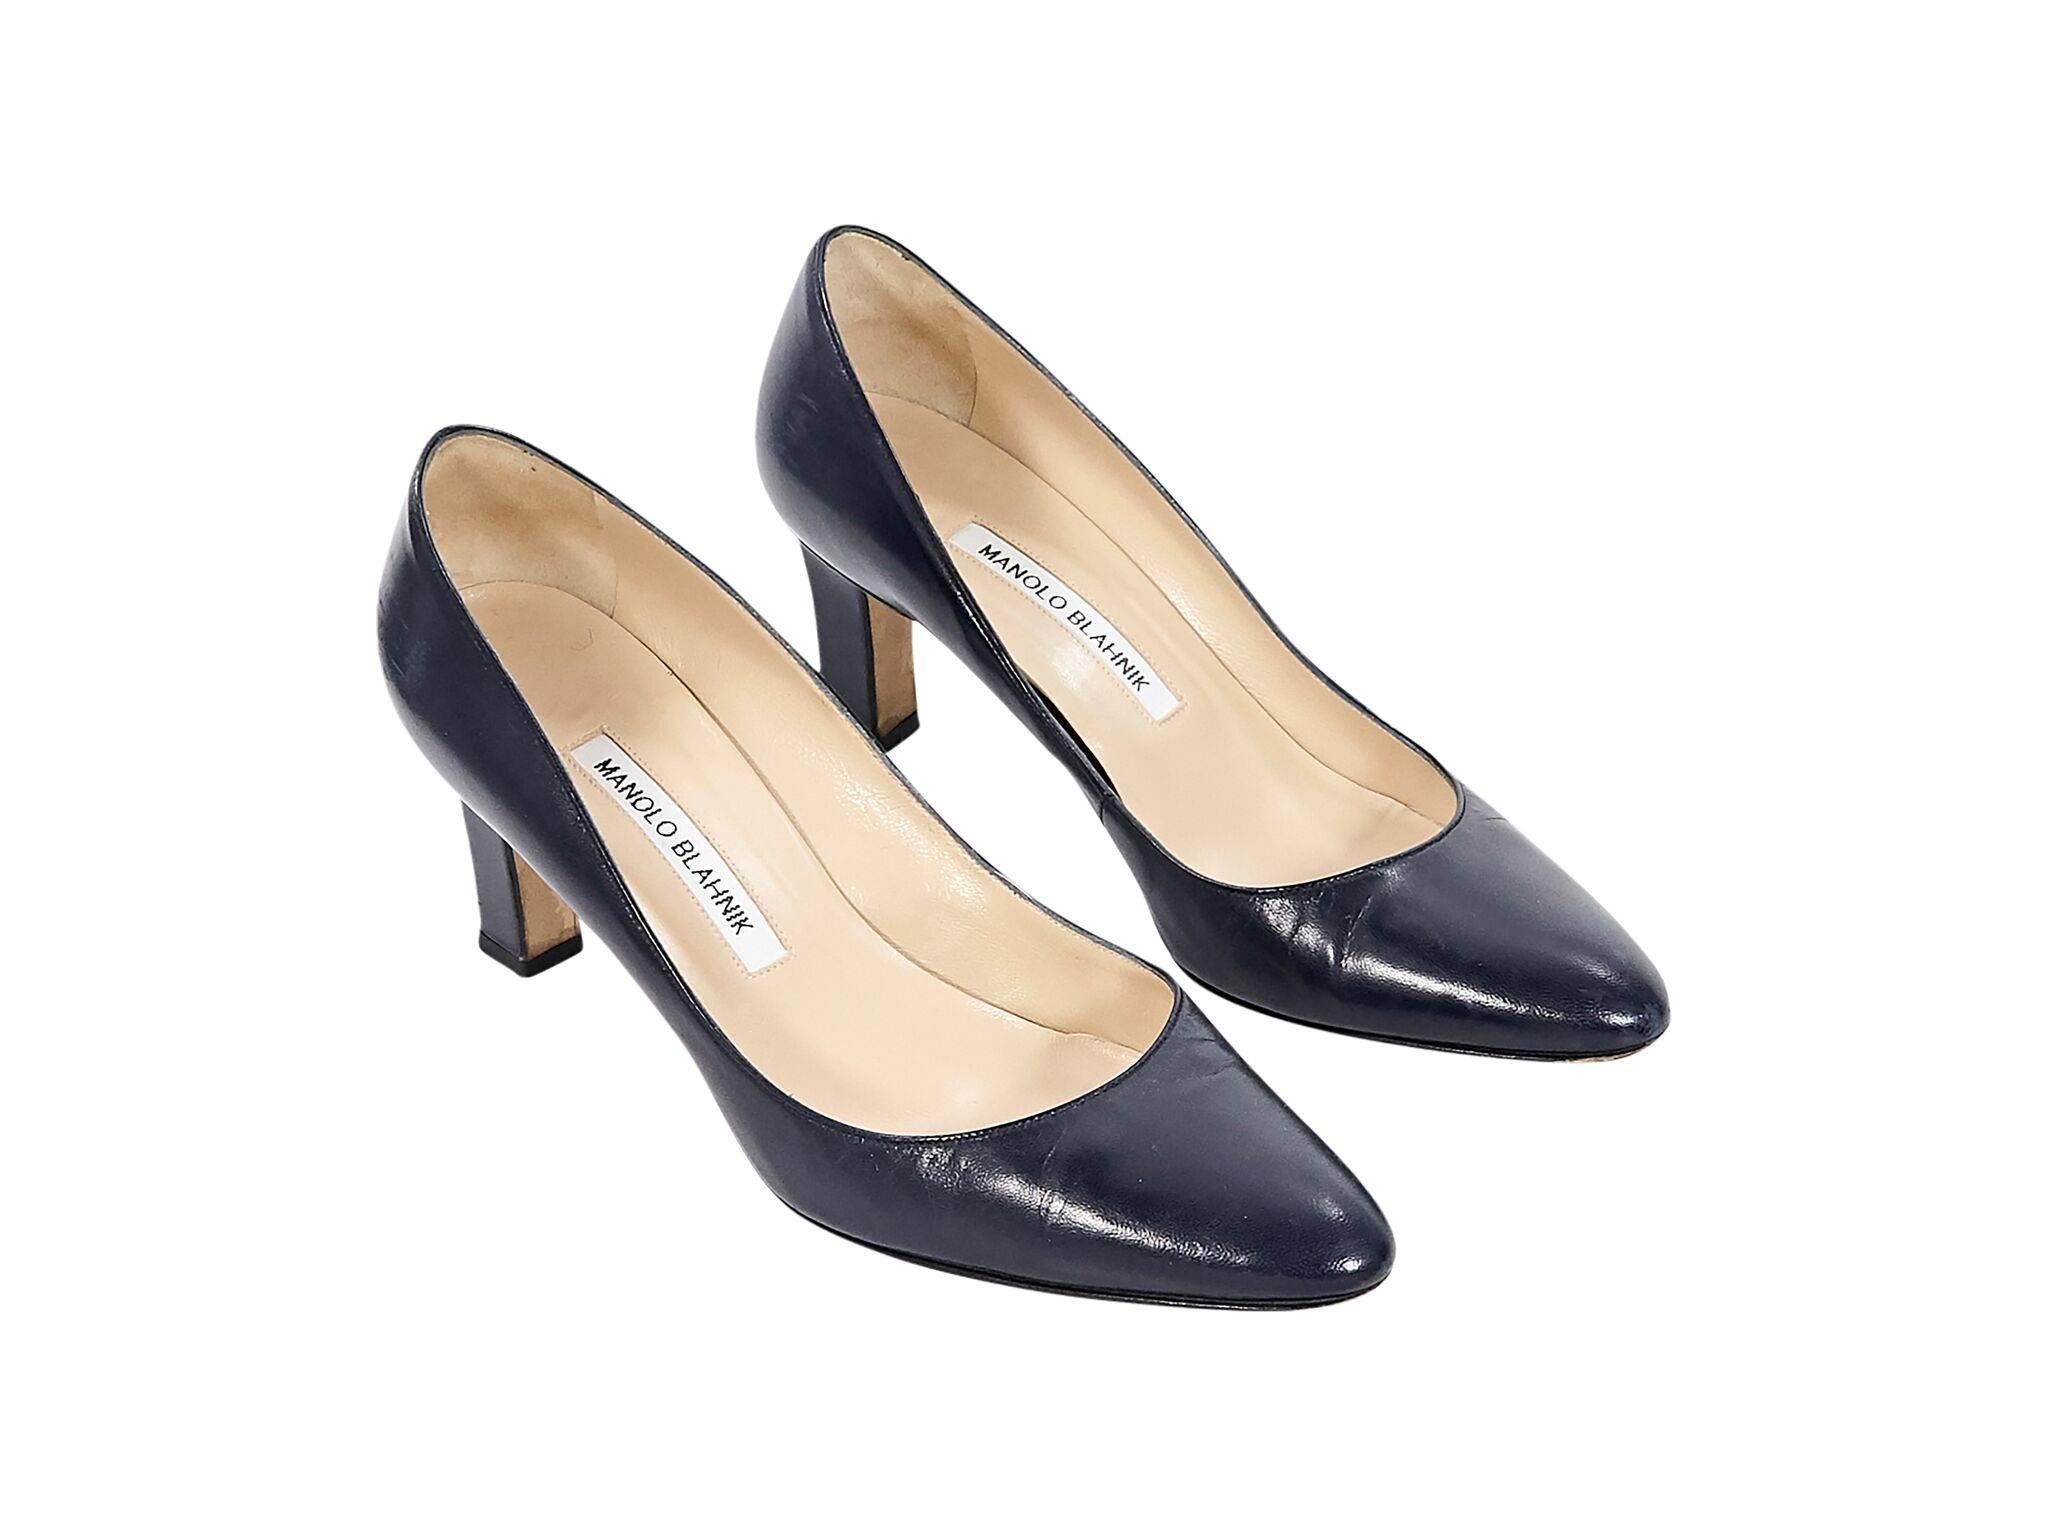 Product details:  Navy blue leather pumps by Manolo Blahnik.  Round toe.  Slip-on style. 
Condition: Pre-owned. Very good. 
Est. Retail $430